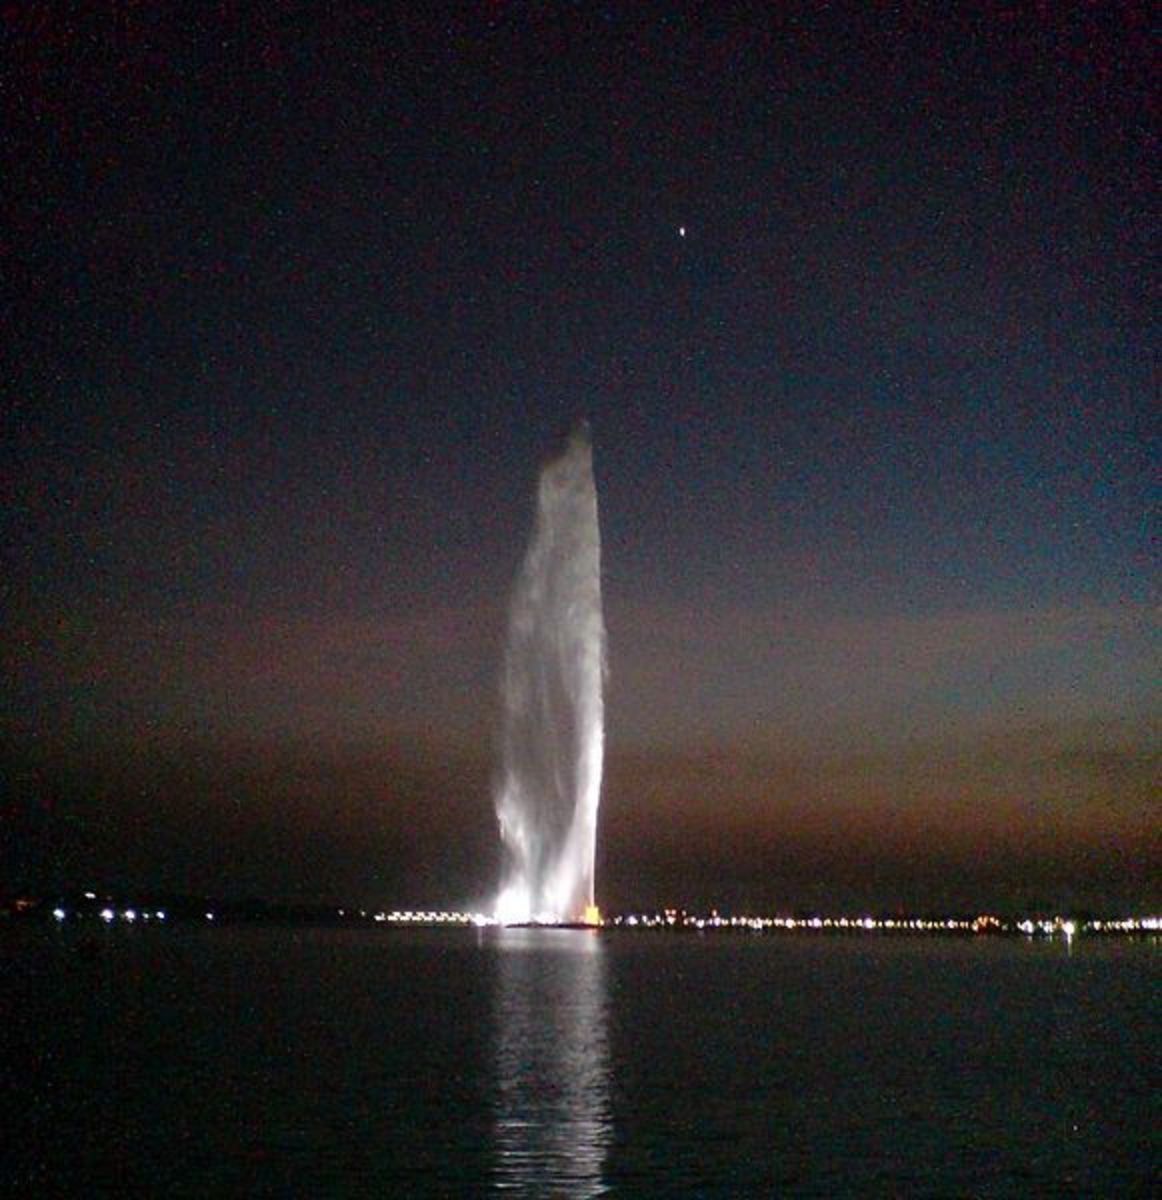 King Fahd's Fountain in Jeddah is the tallest fountain in the world